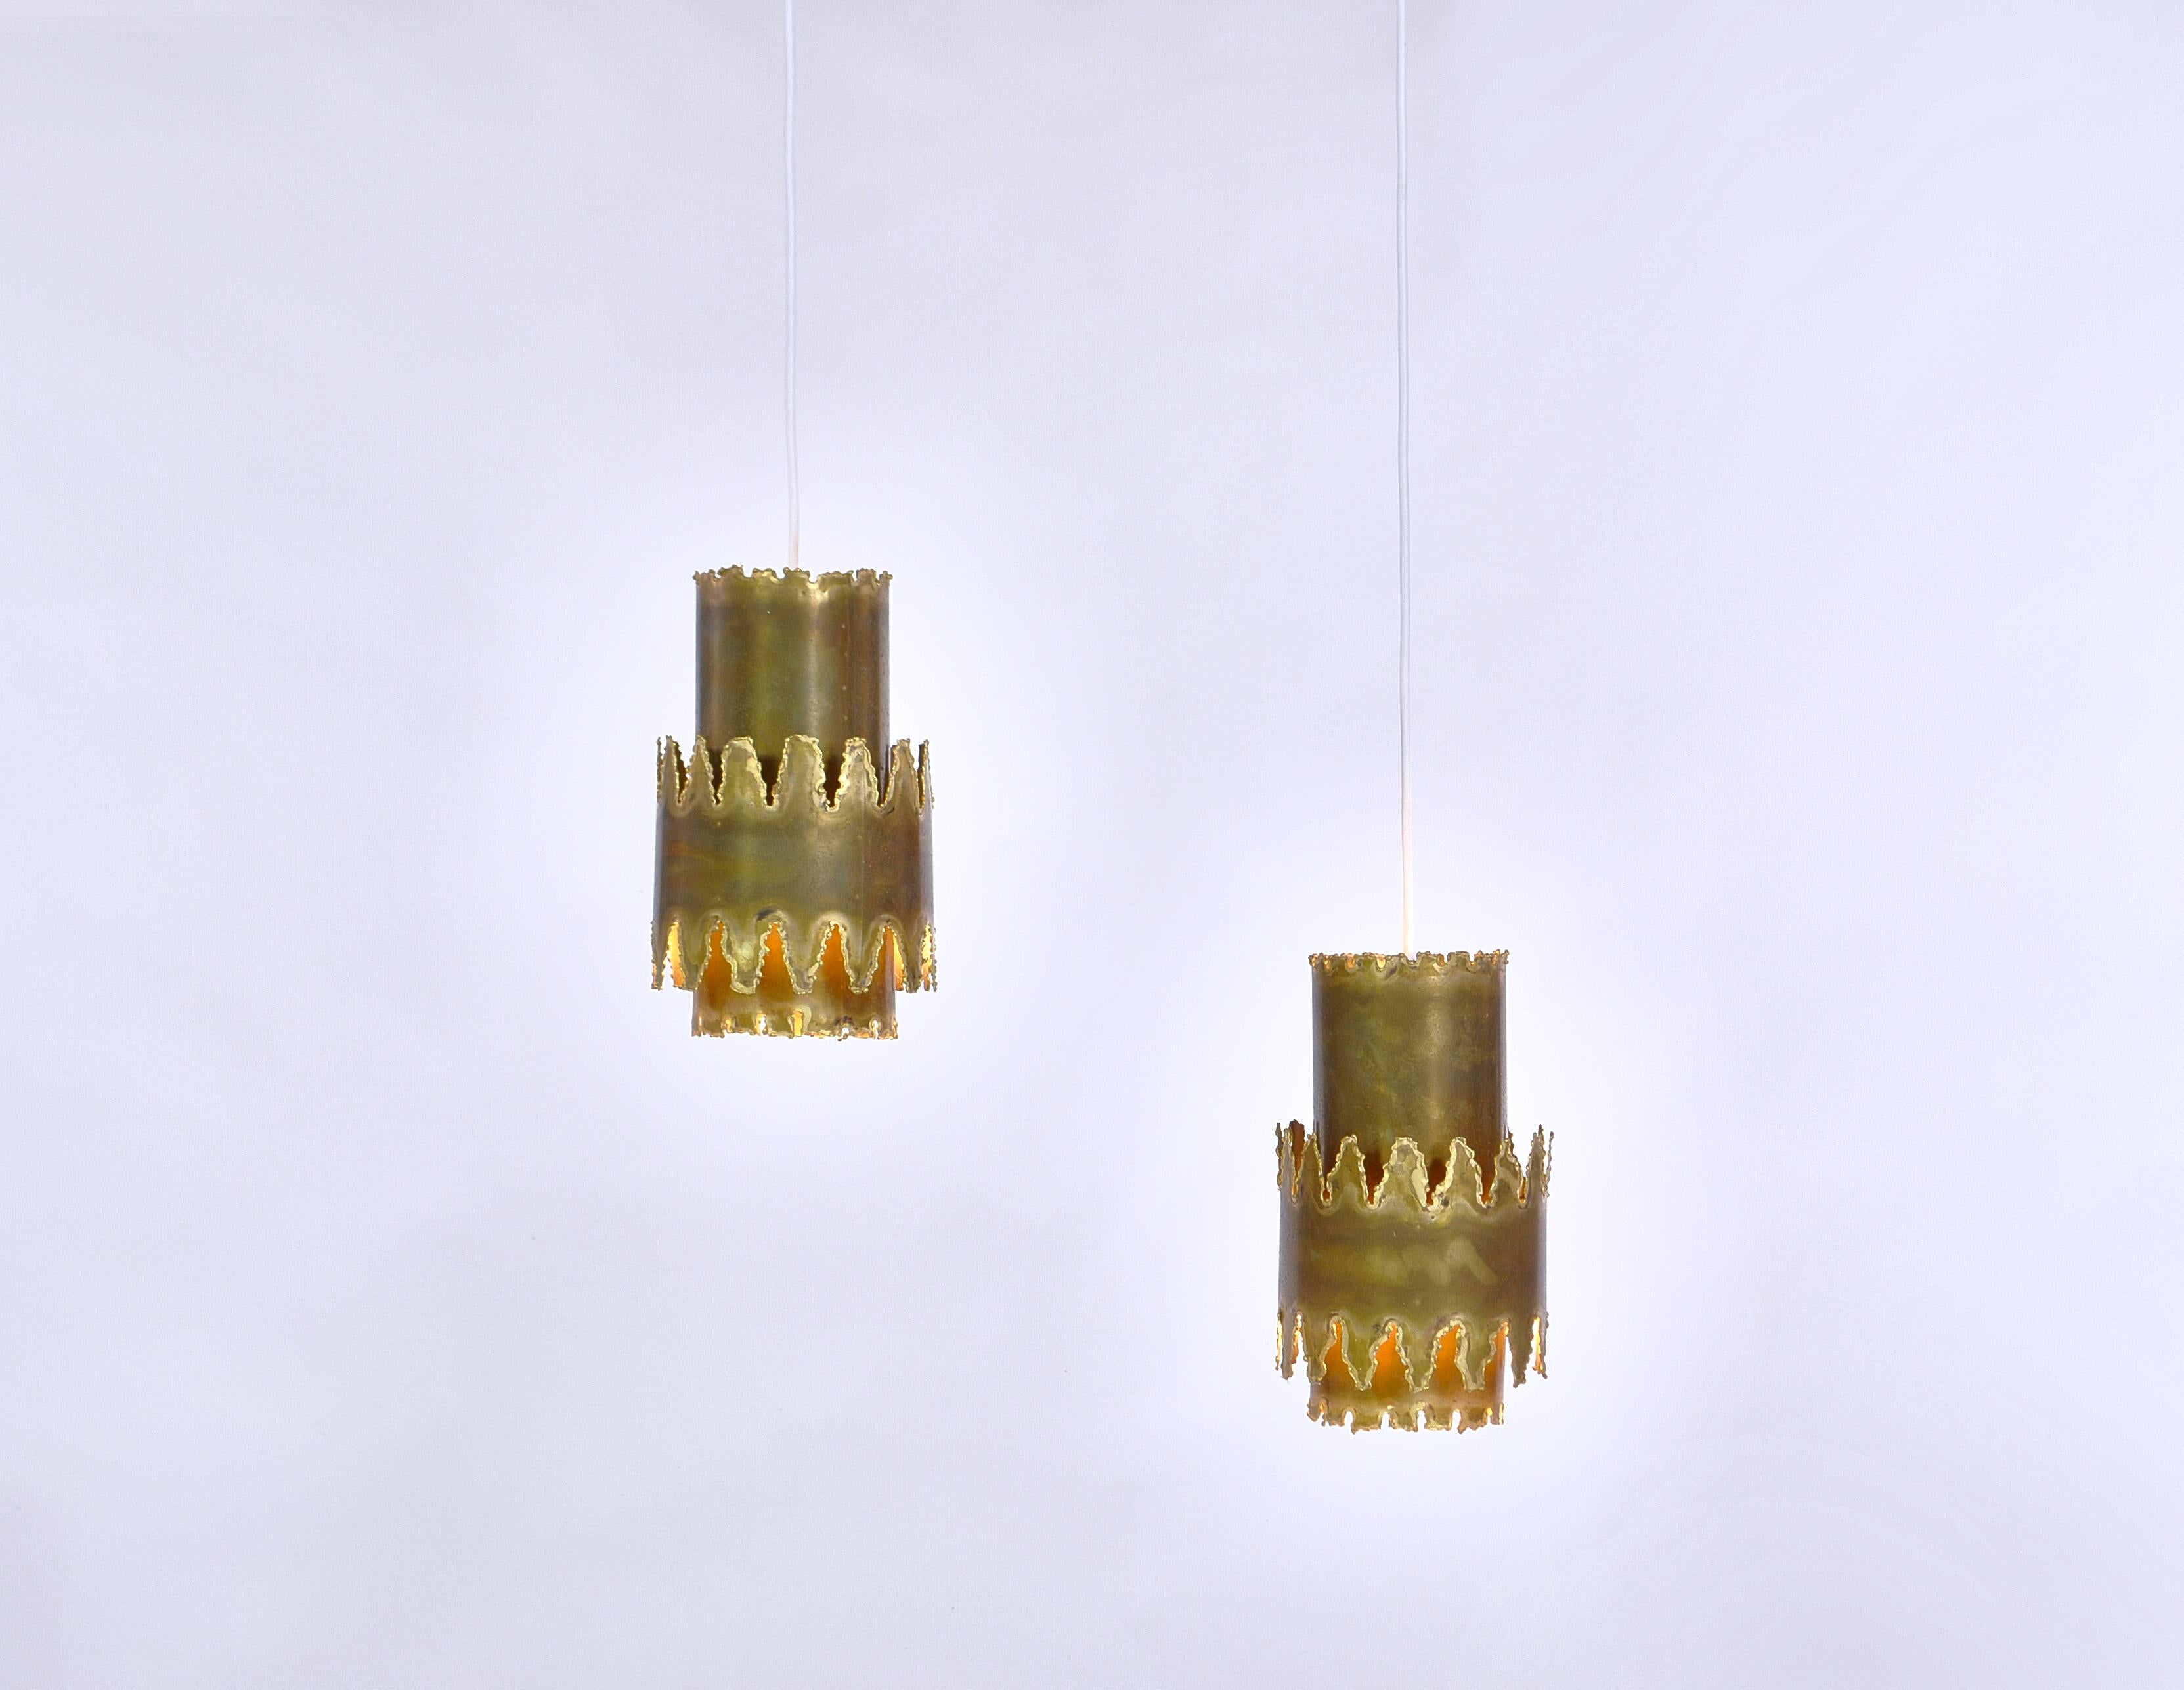 Mid-20th Century Brass Celing Pendants in Brutalist Style by Svend Aage Holm Sørensen, 1960s For Sale